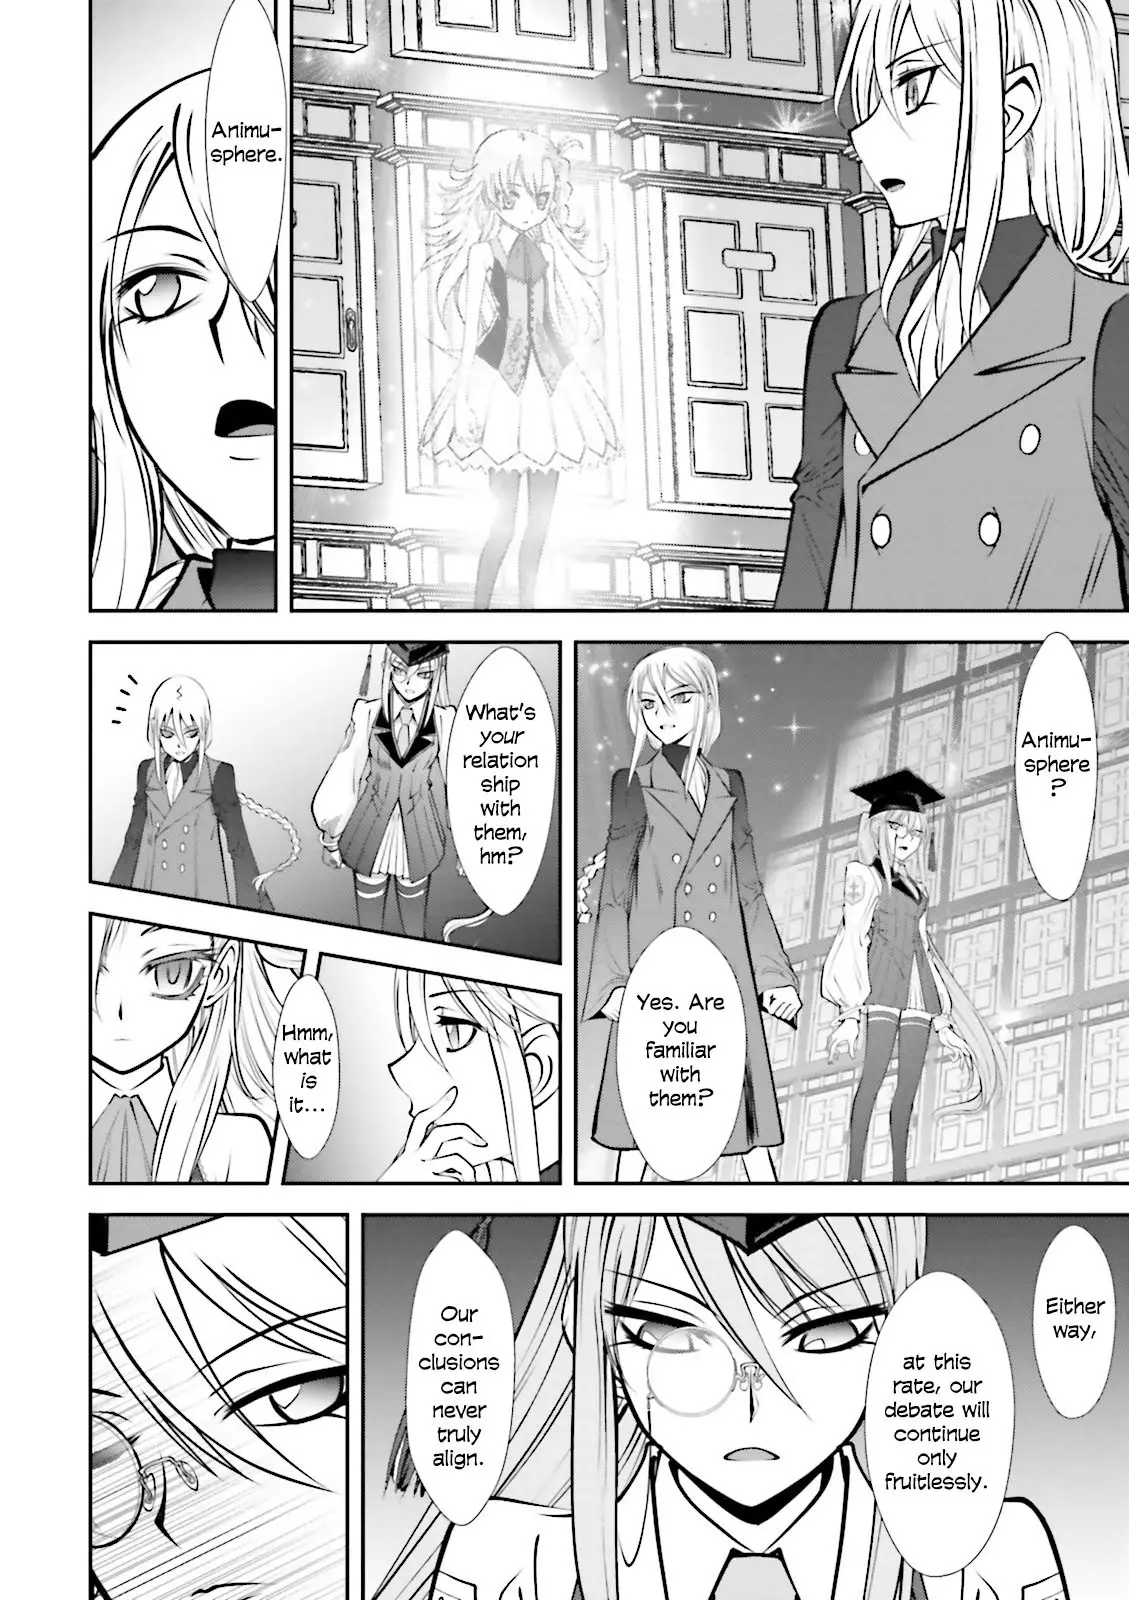 Melty Blood - Back Alley Alliance Nightmare - 9 page 45